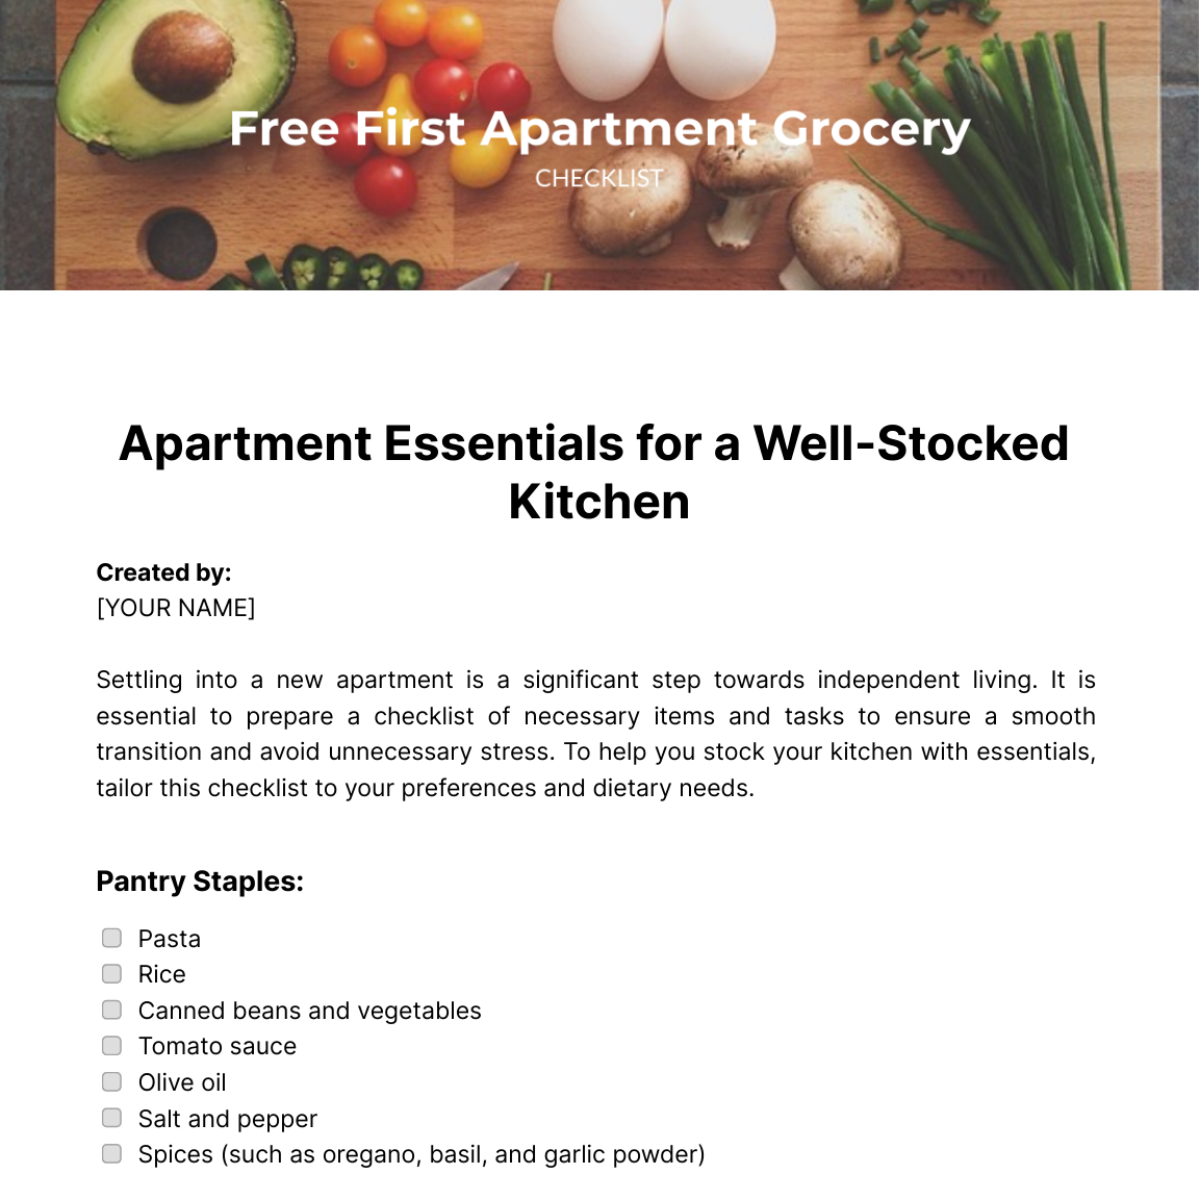 Free First Apartment Grocery Checklist Template